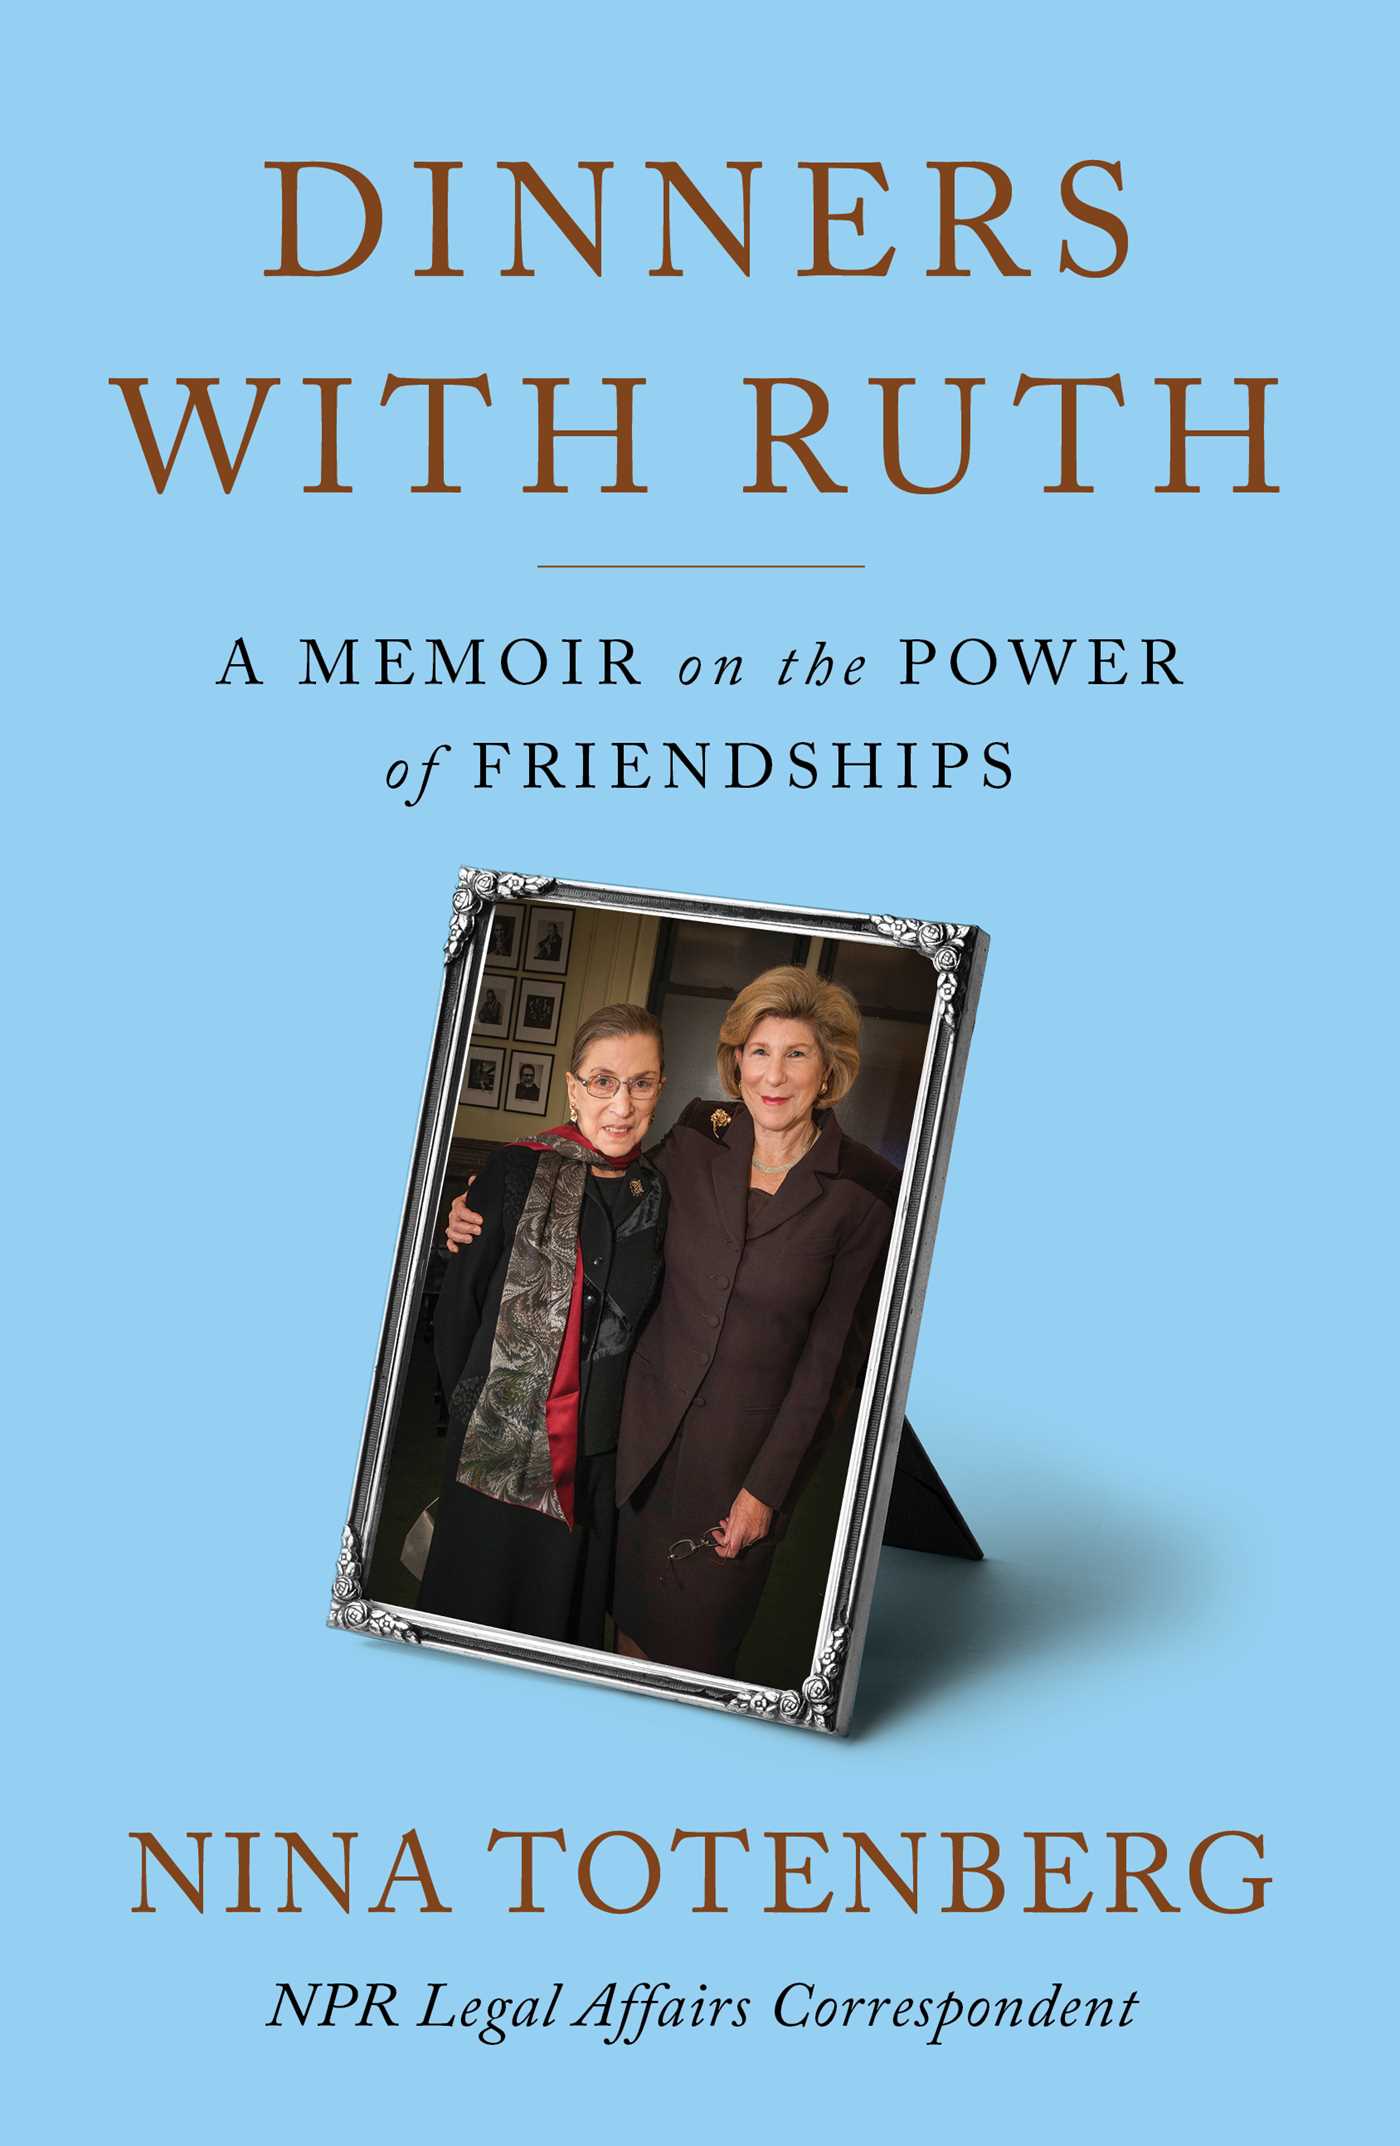 Image for "Dinners with Ruth"